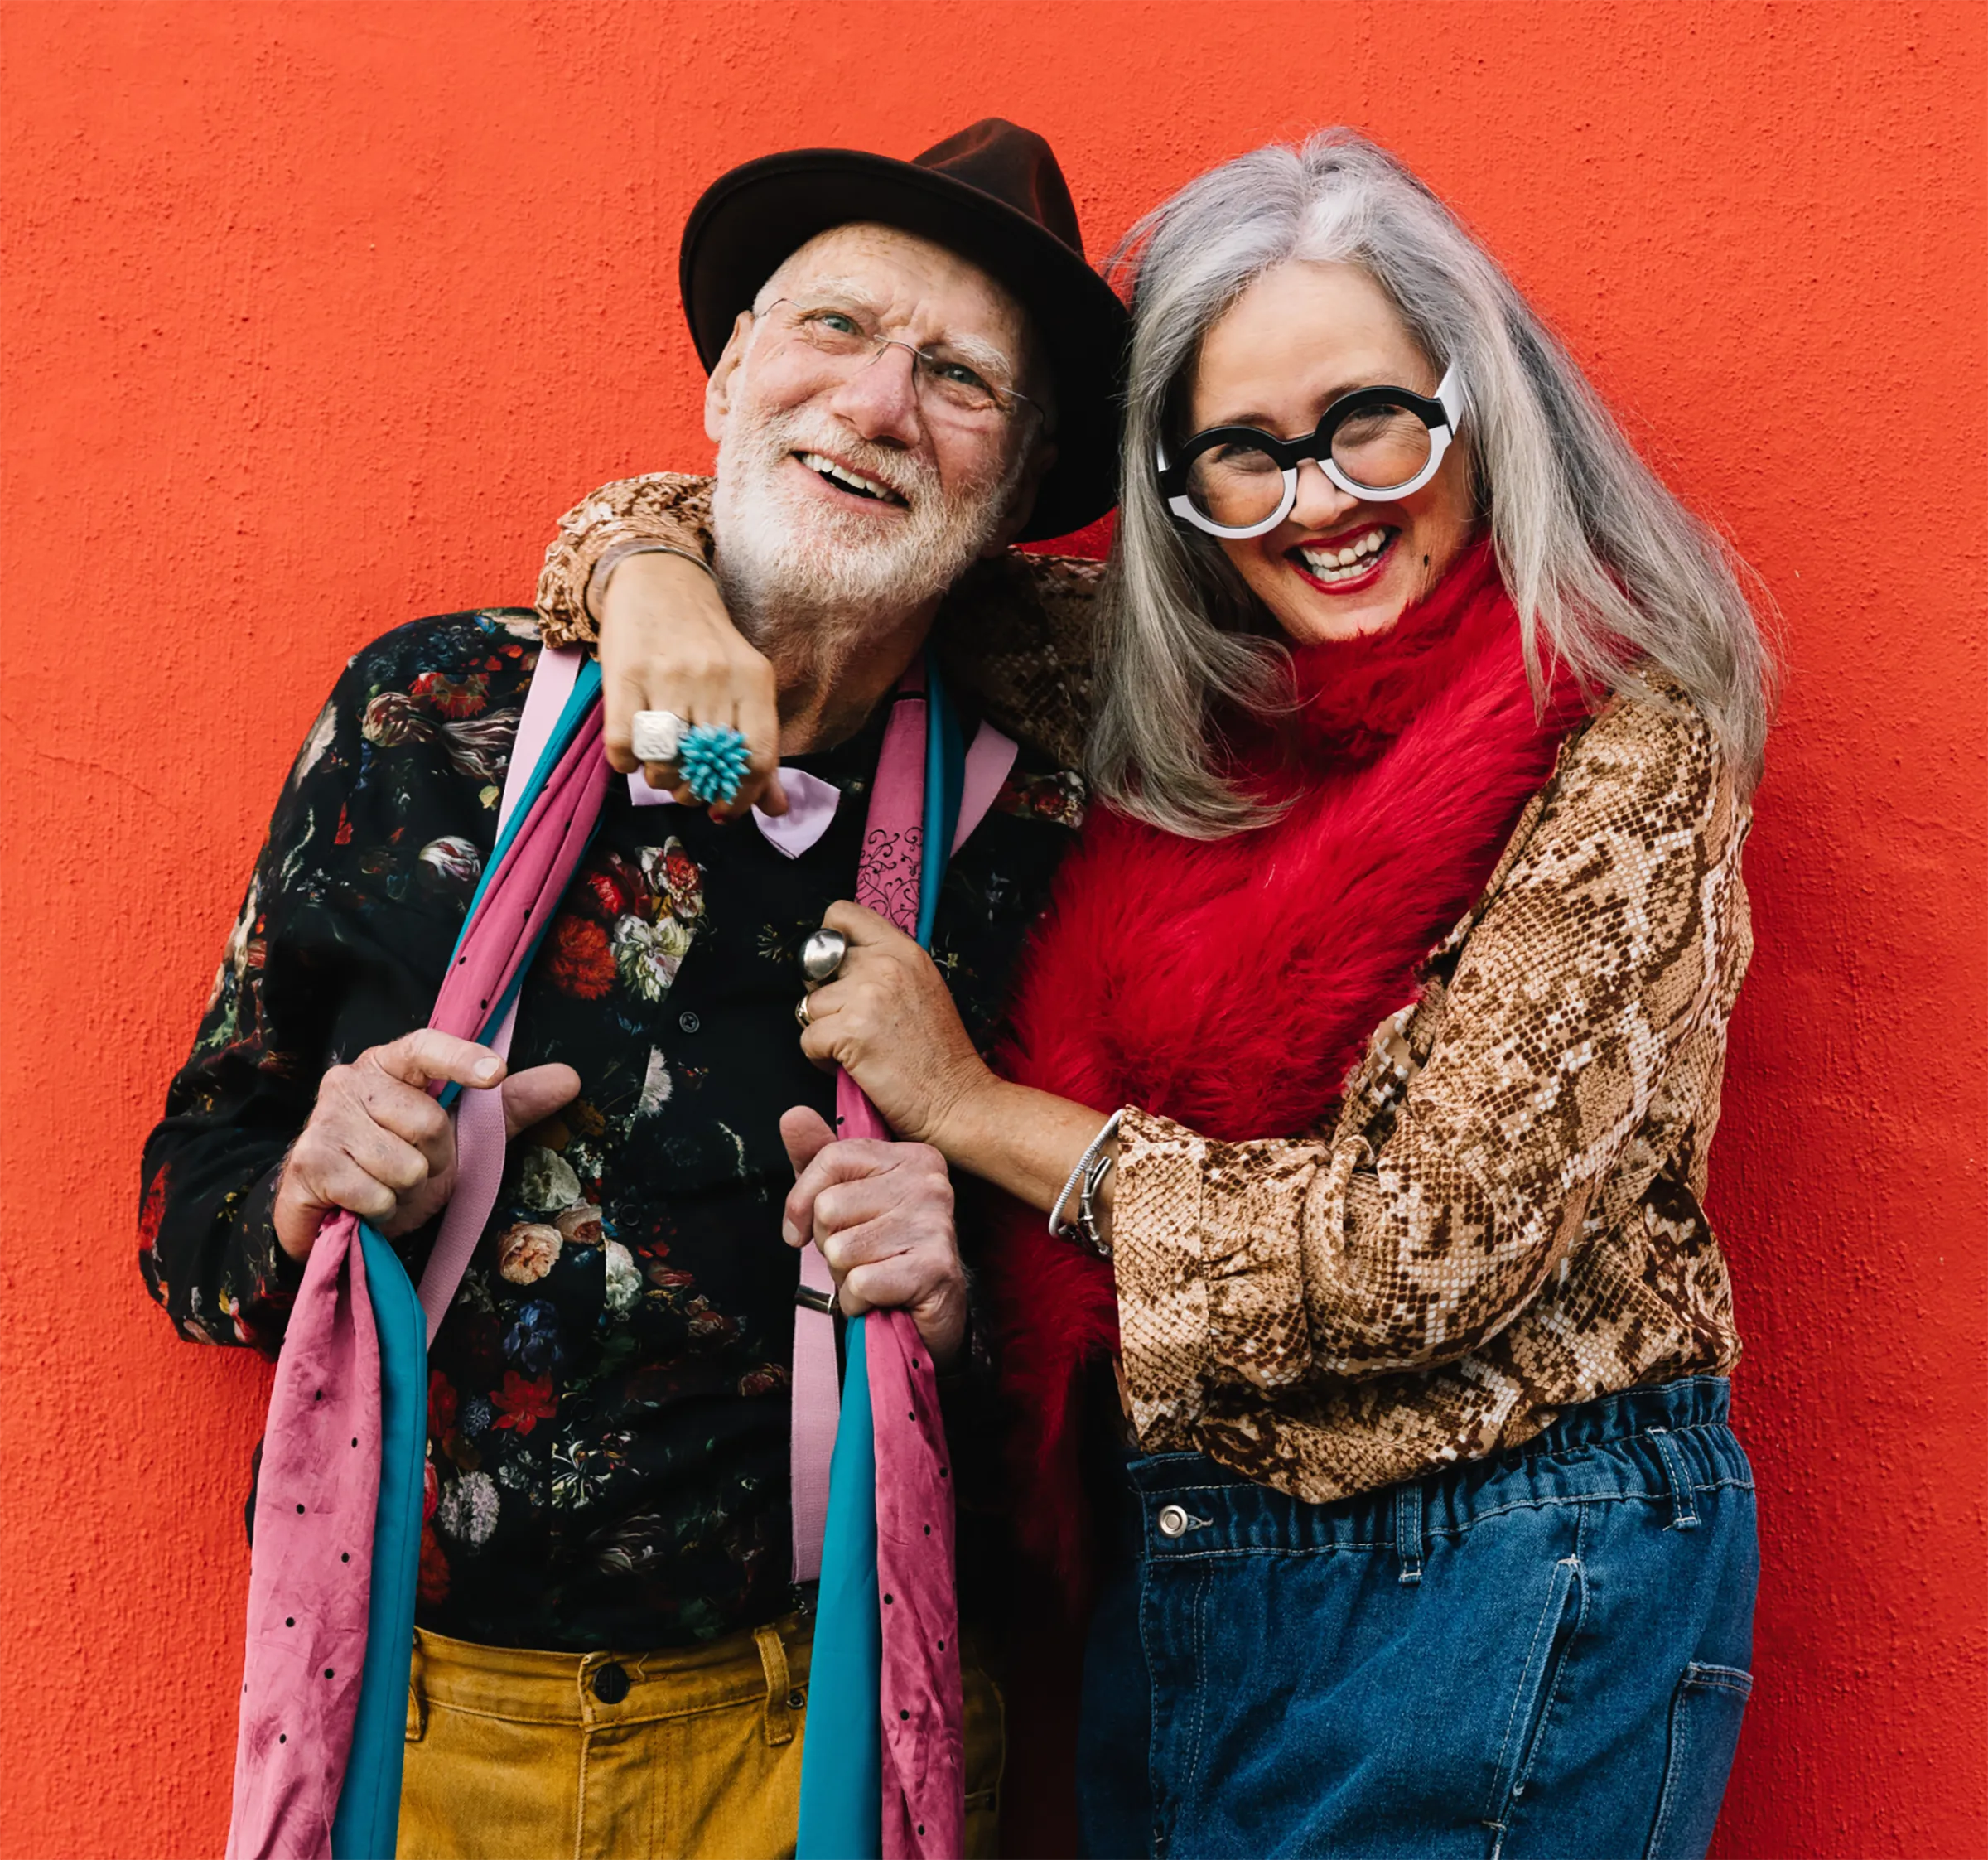 A Memory Care couple wearing loud colors and patterns posing in front of a bright orange wall.